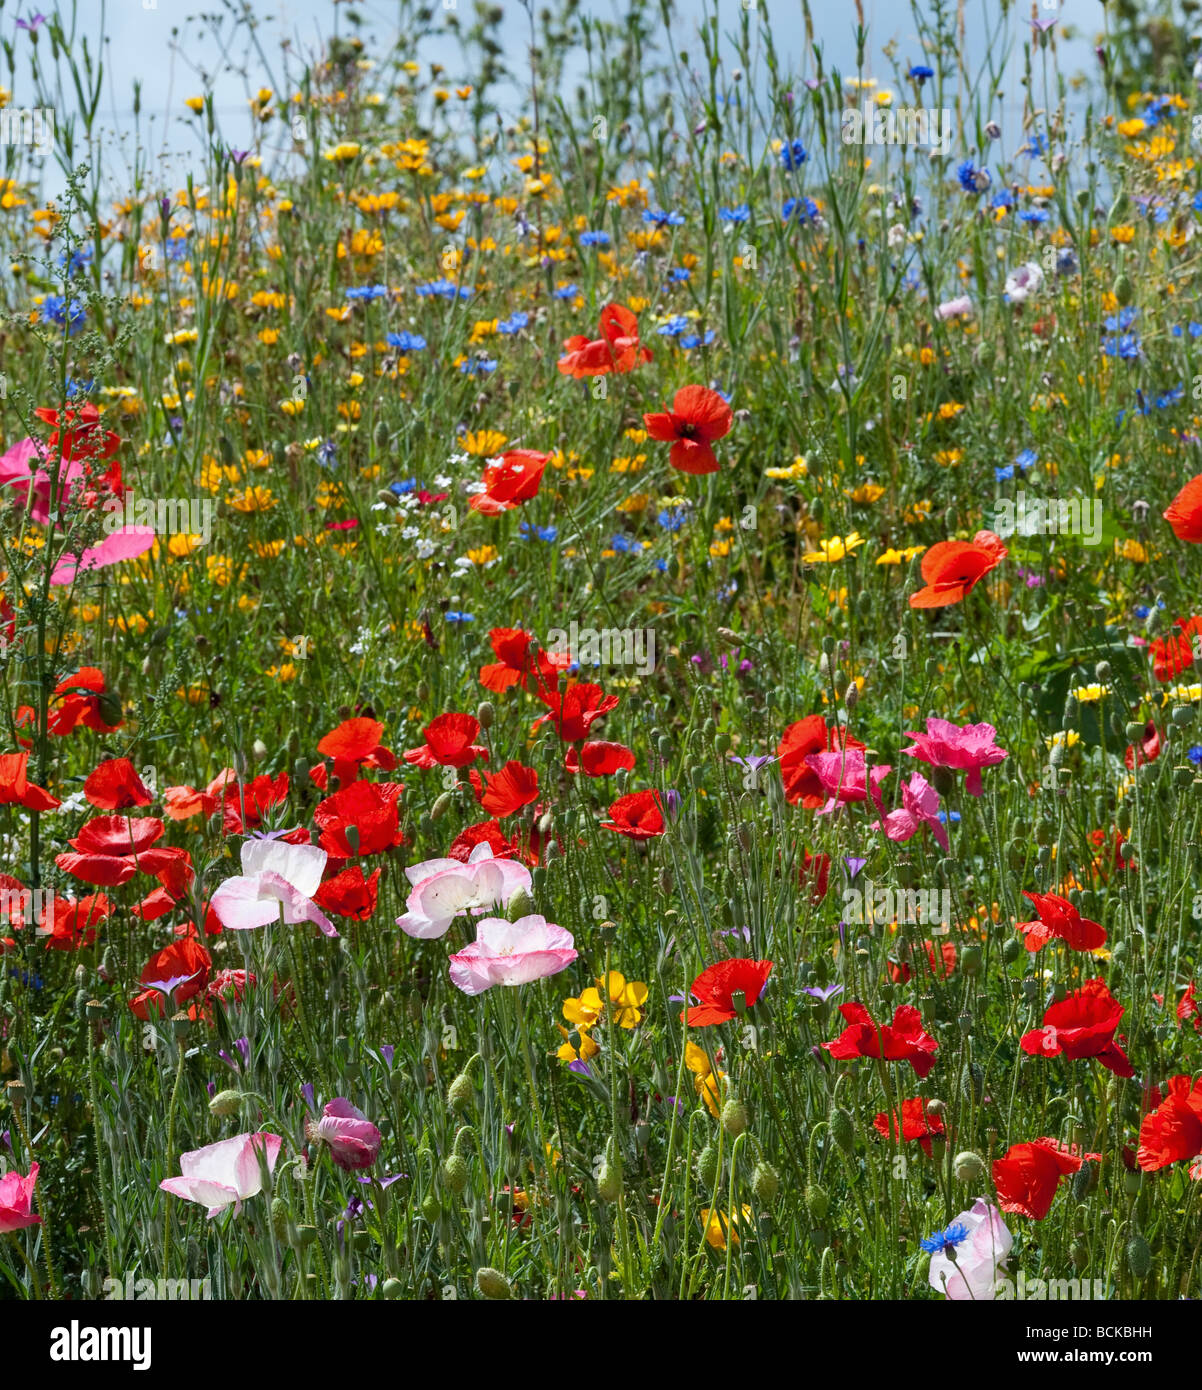 Wildflowers with poppies in the english countryside. England Stock Photo